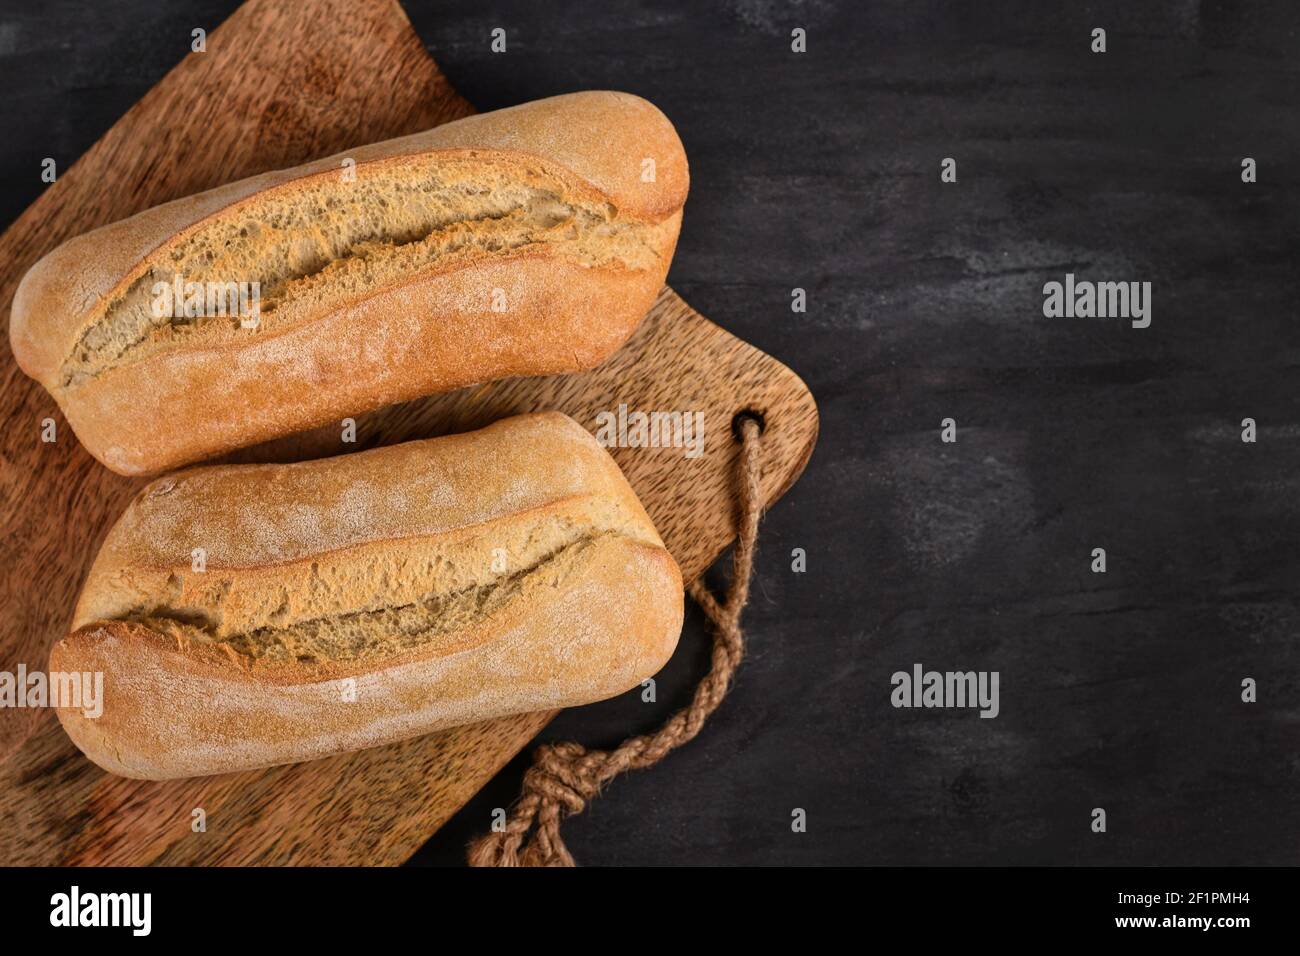 Two whole rustic bread rolls on wooden cutting board on dark table Stock Photo